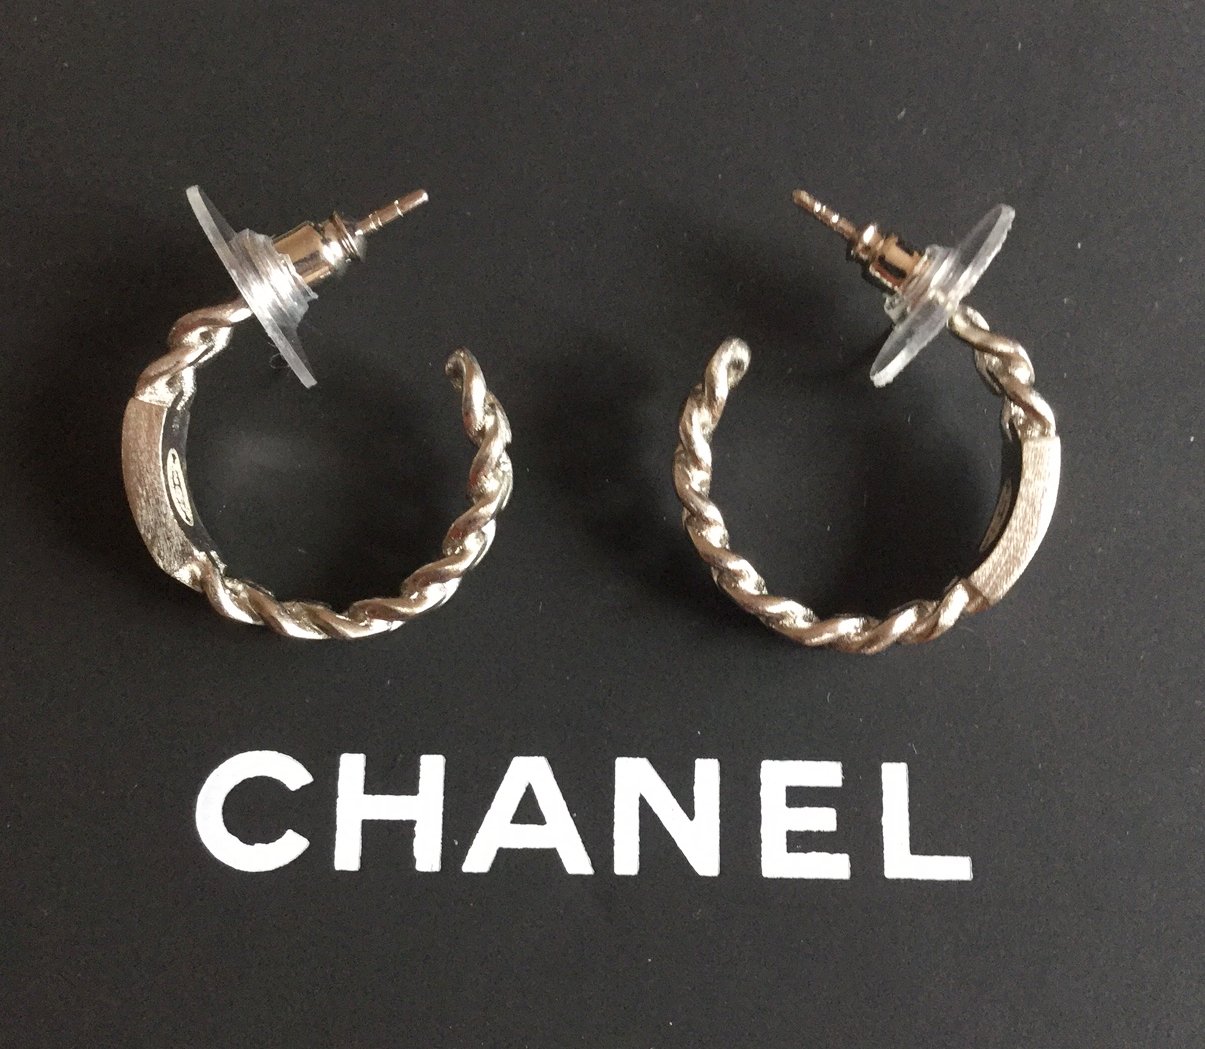 Chanel Crystal Mini Timeless CC Earrings Silver – Coco Approved Studio